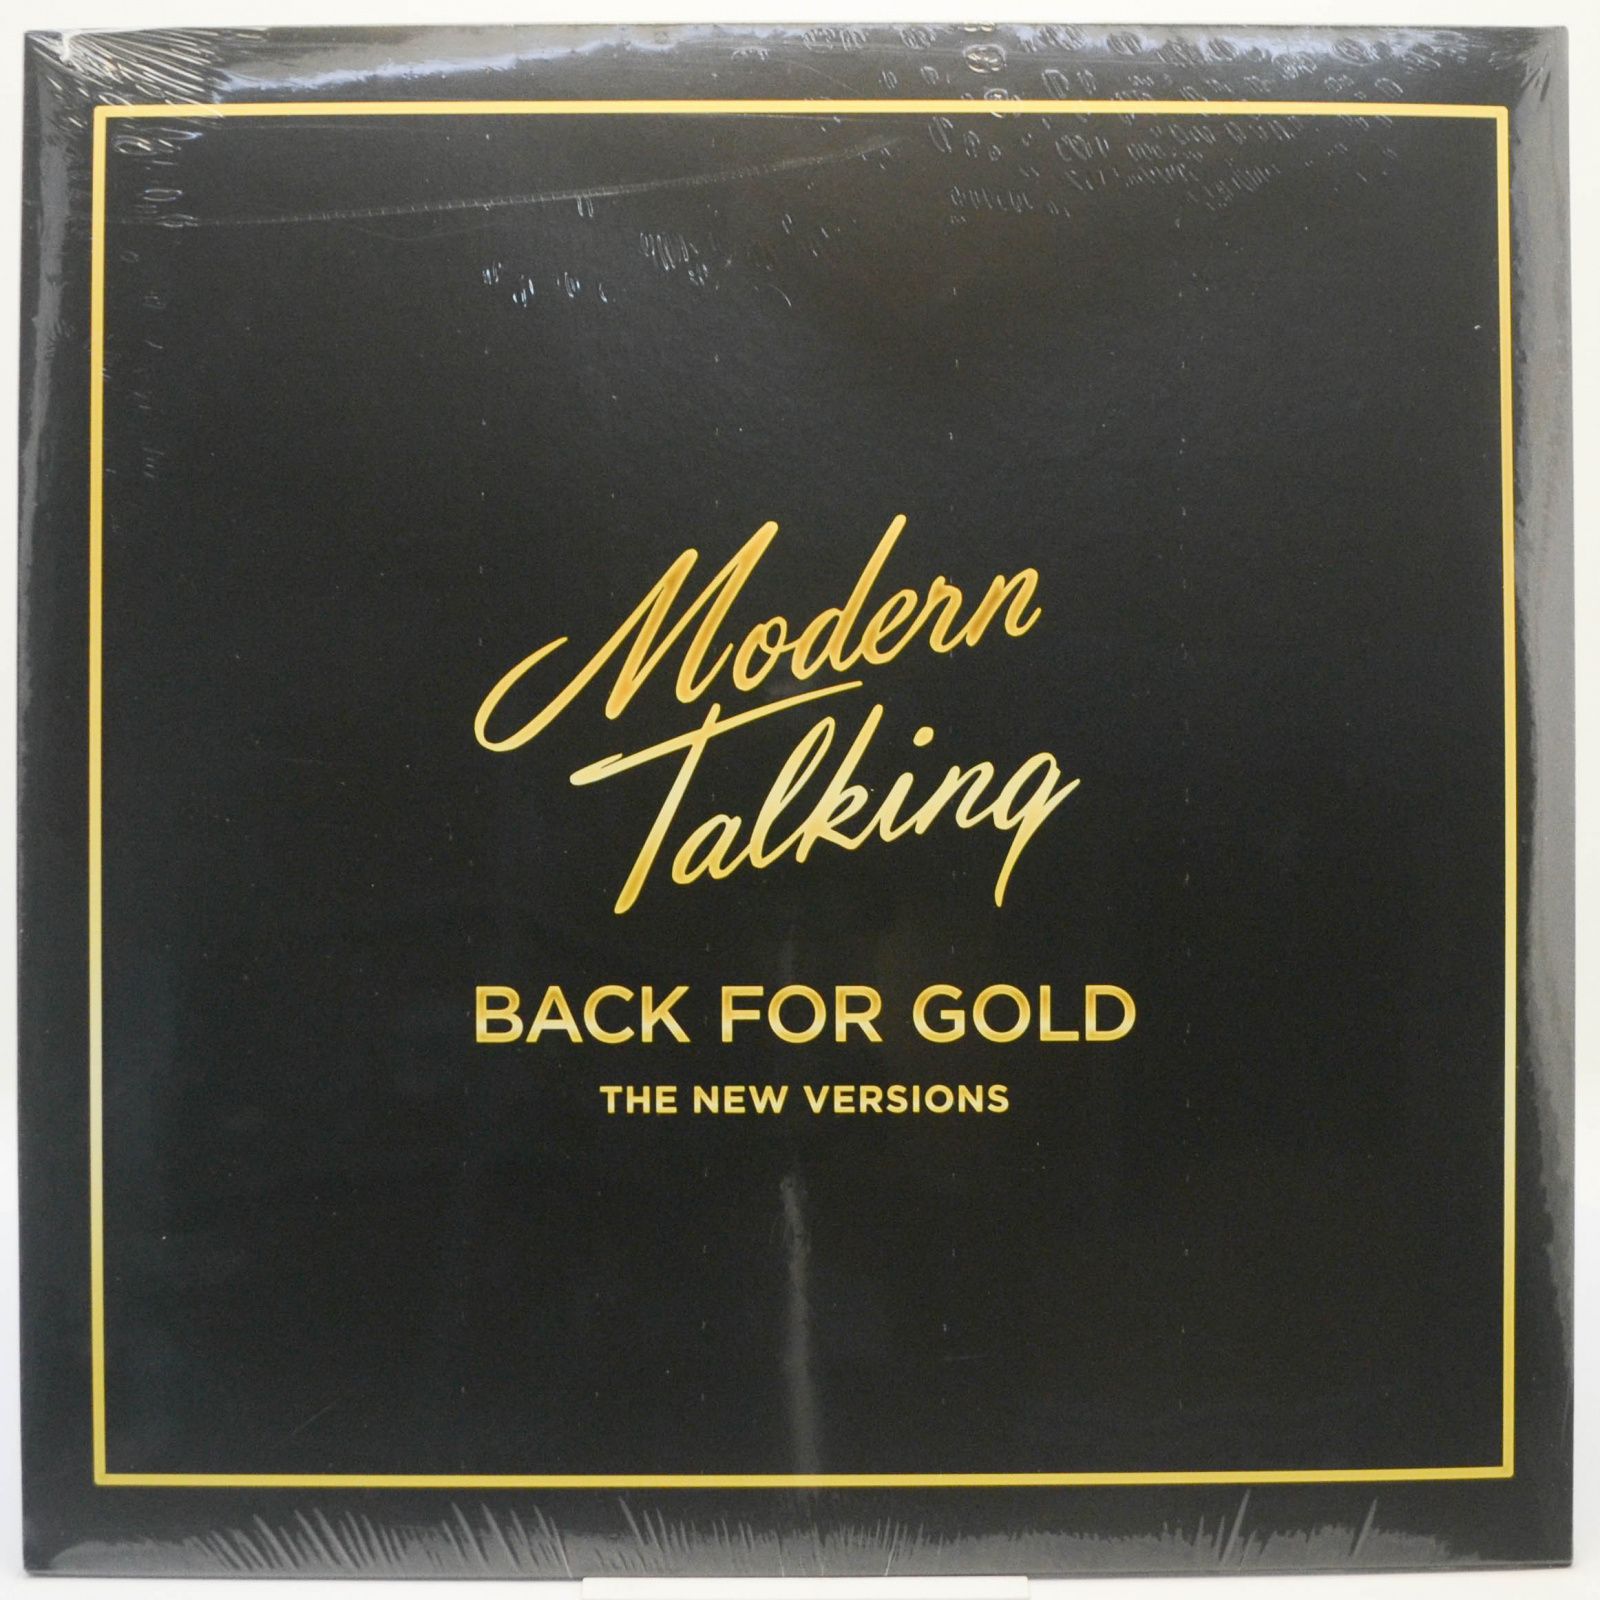 Back For Gold - The New Versions, 2017